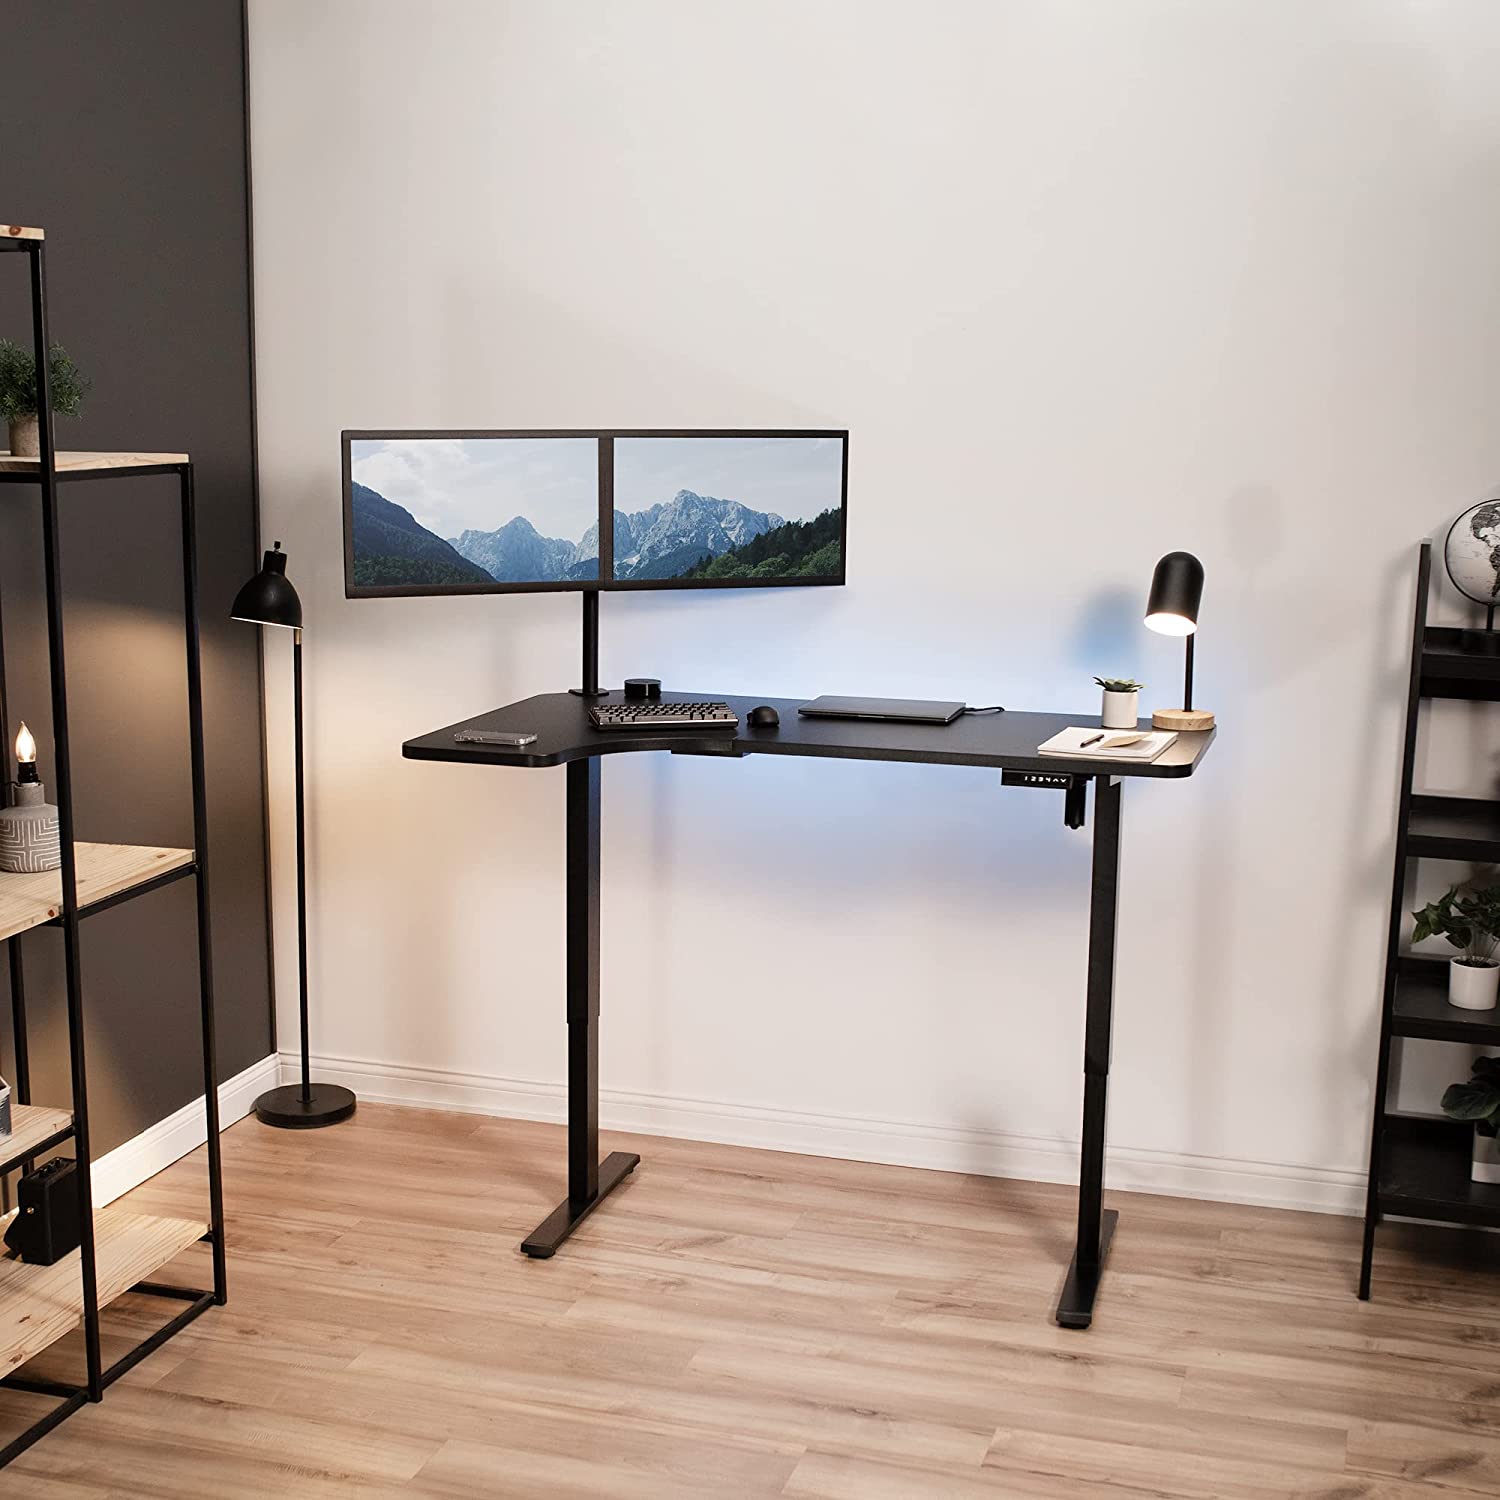 The Vivo Electric Adjustable L Shaped Desk in a home office